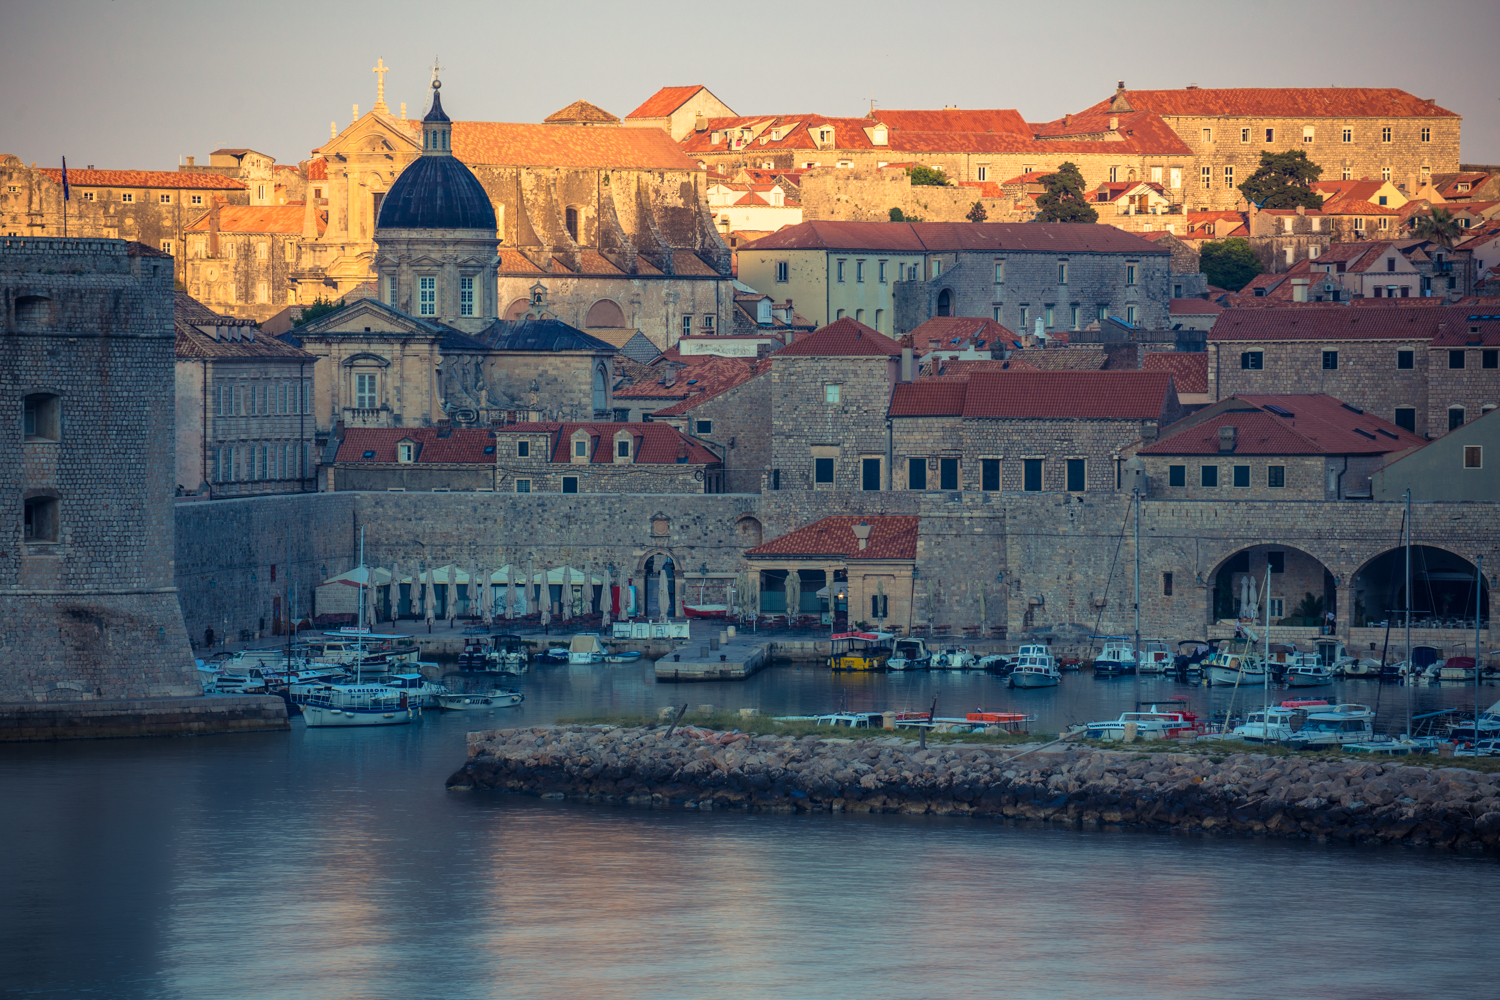 Old town of Dubrovnik, as seen from the Lazaretto